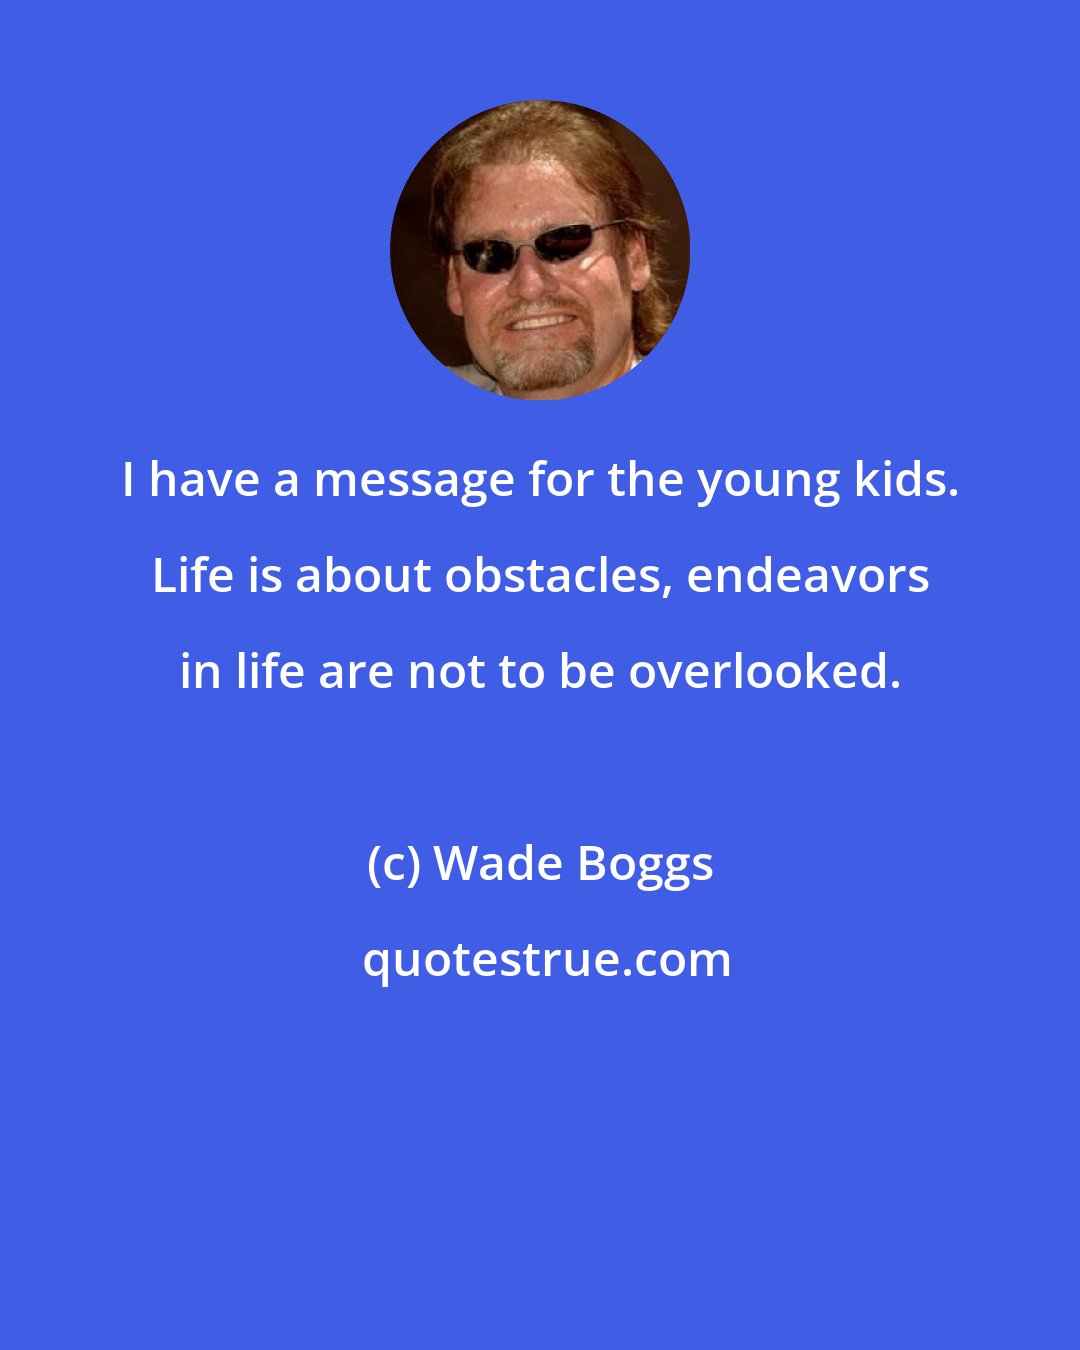 Wade Boggs: I have a message for the young kids. Life is about obstacles, endeavors in life are not to be overlooked.